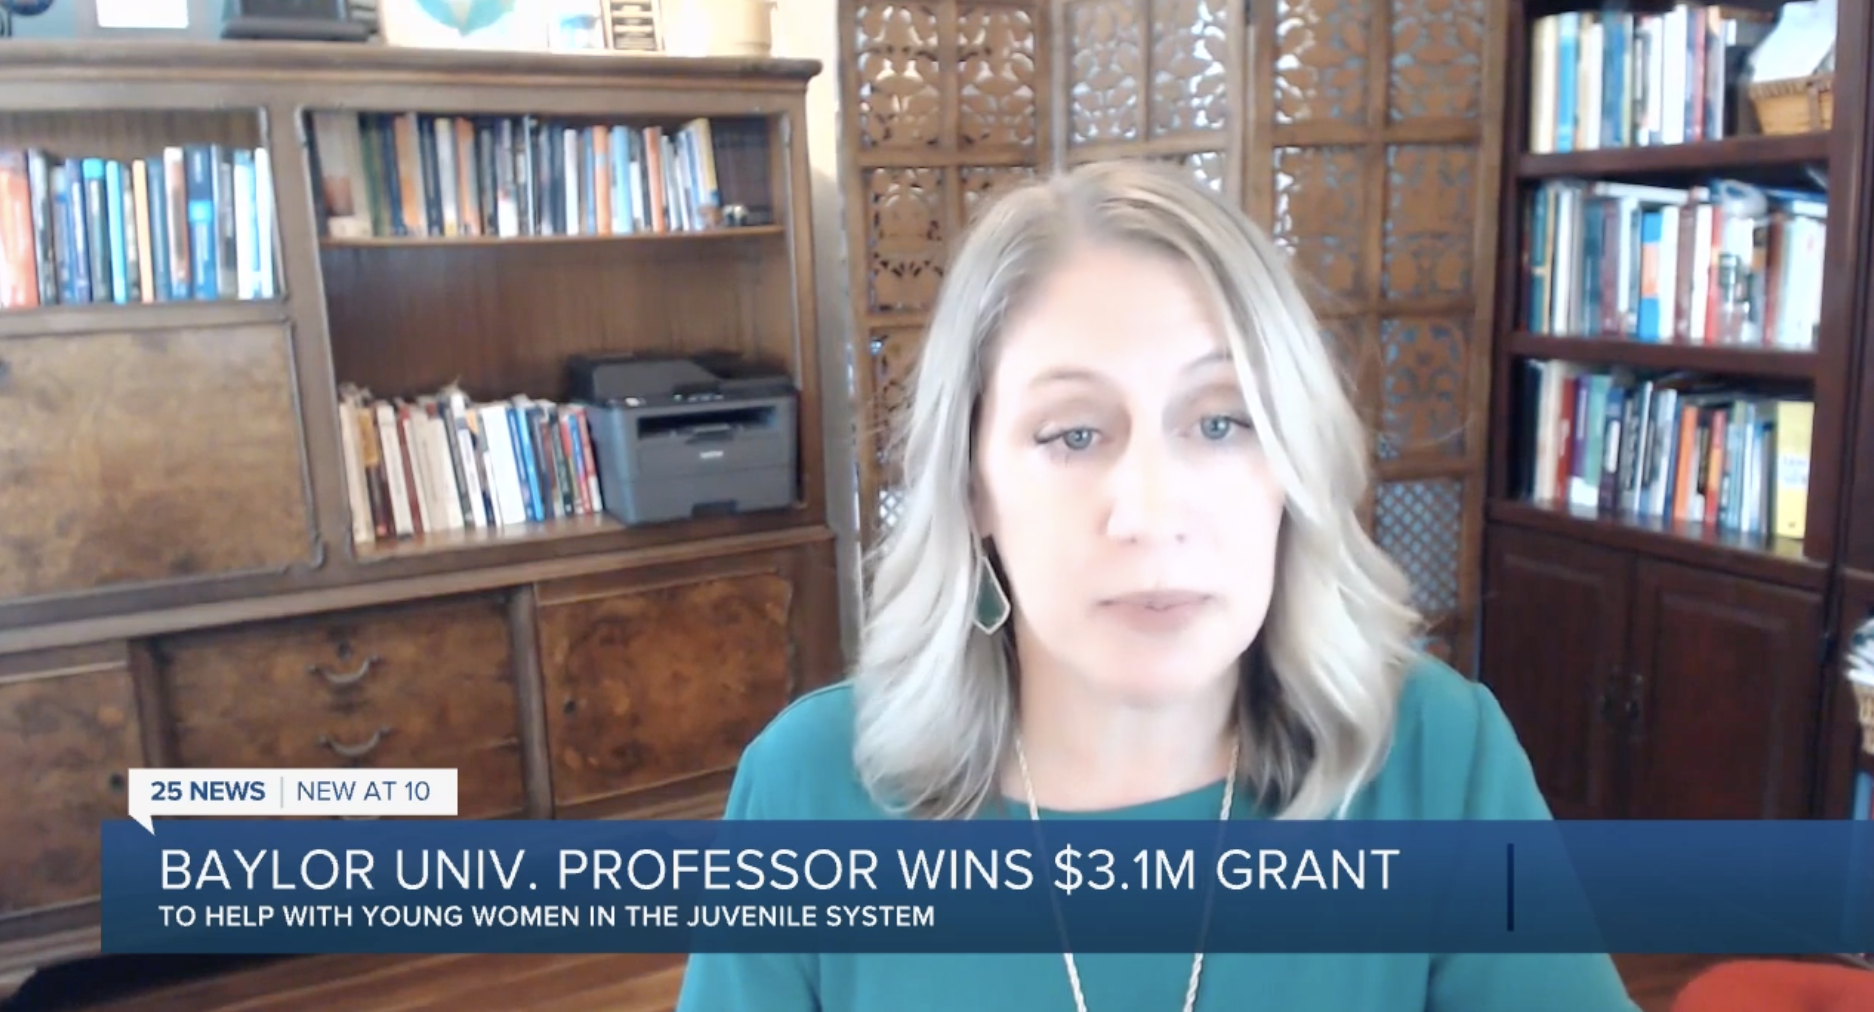 WATCH: Baylor professor receives $3.1M grant to help women in juvenile justice system